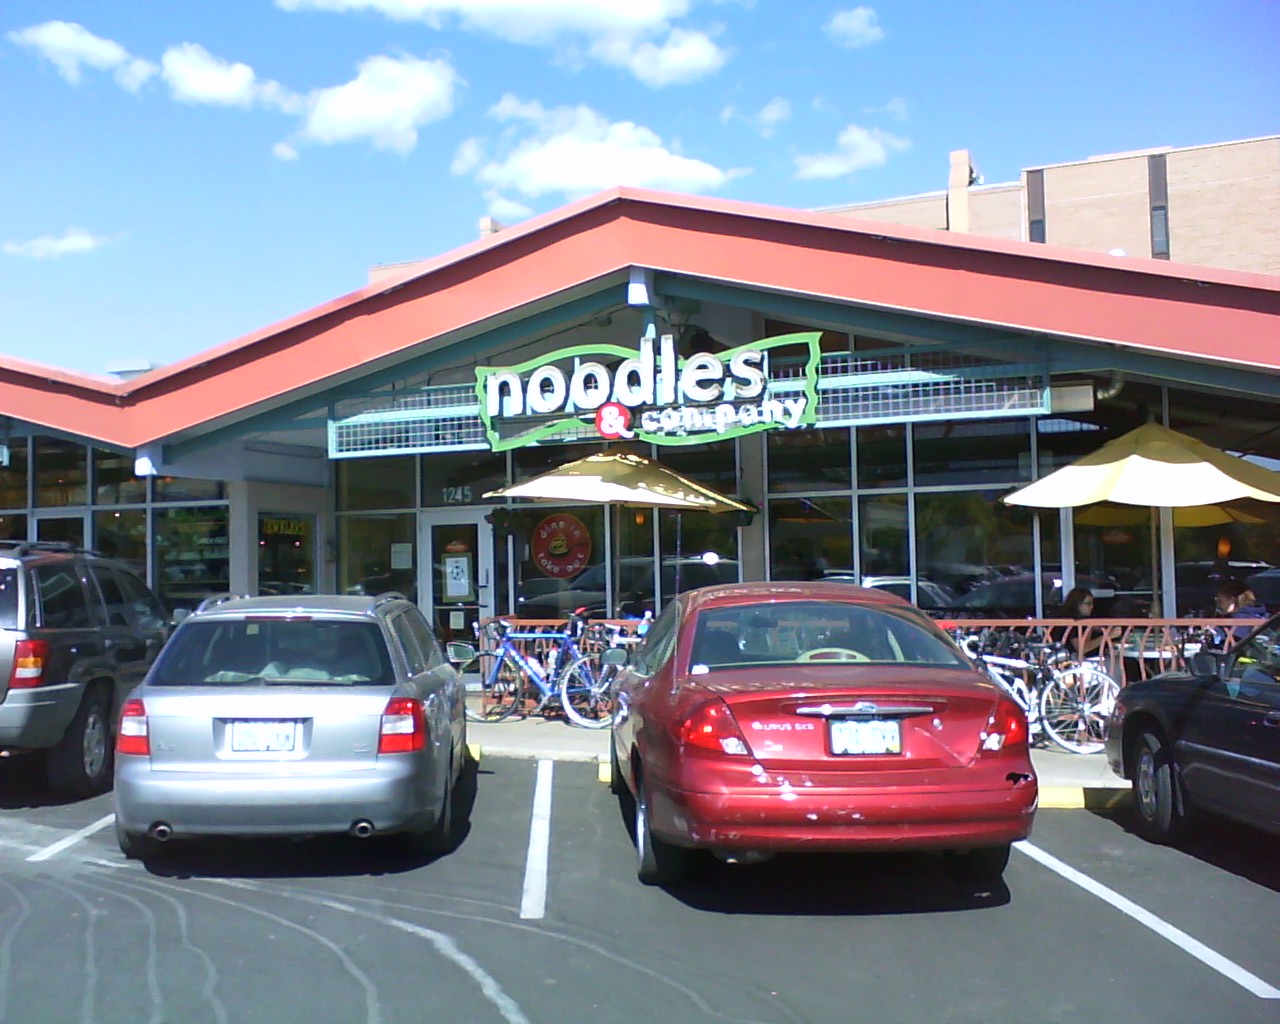 [Mile 48, 11:48 a.m.] Made it to the Noodles in Boulder.